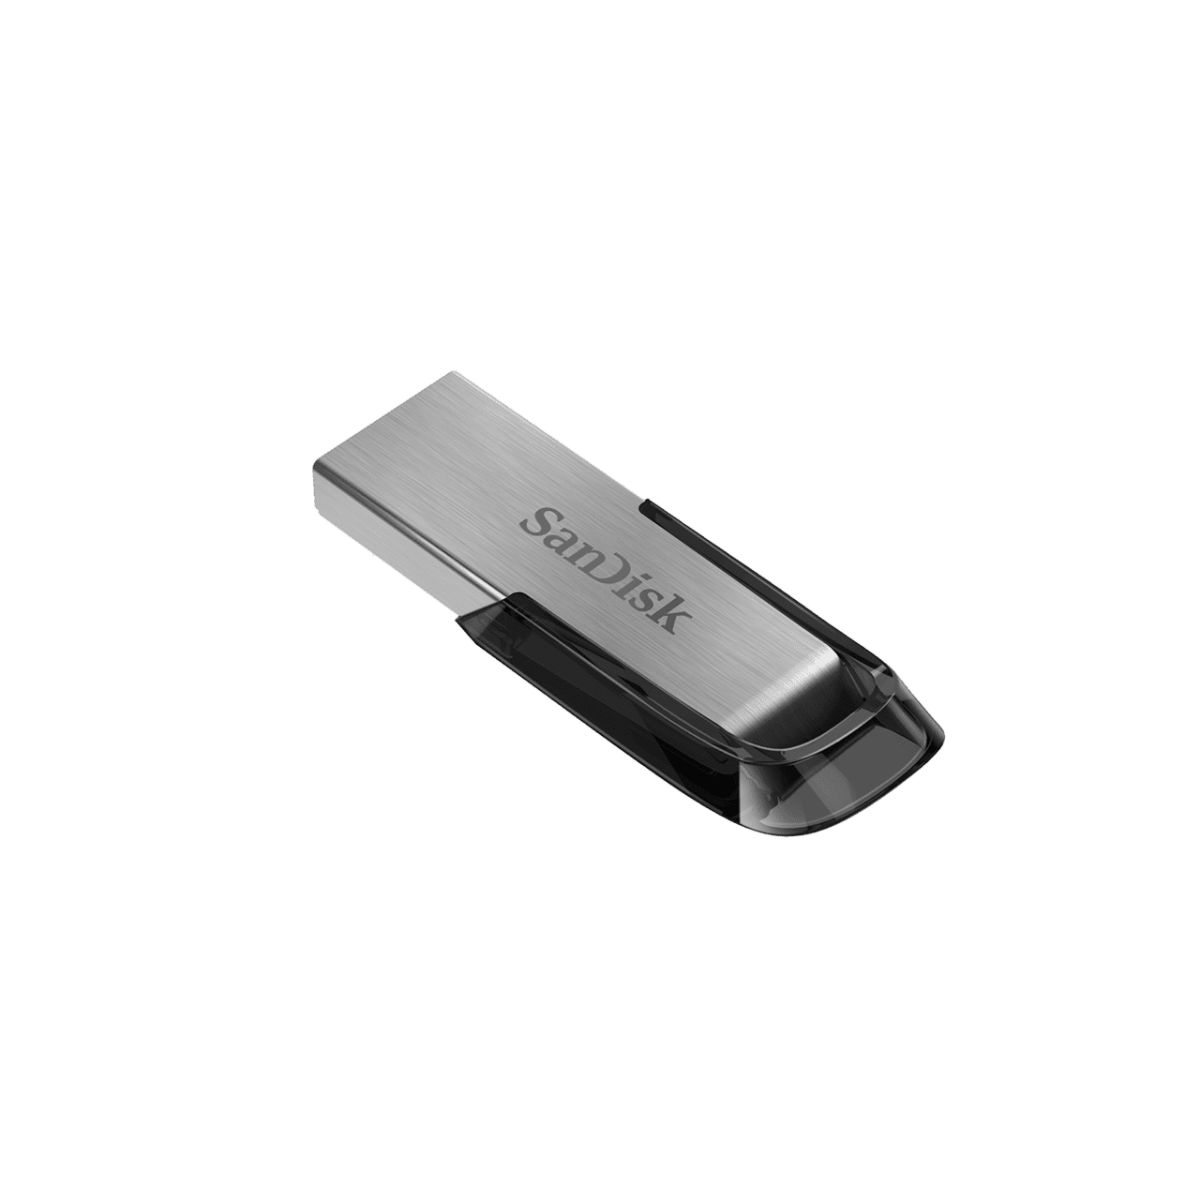 Ultra Flair Usb 3 0 Right.png.thumb .1280.1280 Sandisk &Lt;Div Class=&Quot;Inheritpara Mb-4&Quot;&Gt; The Sandisk Ultra Flair™ Usb 3.0 Flash Drive Moves Your Files Fast. Spend Less Time Waiting To Transfer Files And Enjoy High-Speed Usb 3.0 Performance Of Up To 150Mb/S&Lt;A Class=&Quot;Disclosure&Quot; Tabindex=&Quot;0&Quot; Href=&Quot;Https://Shop.westerndigital.com/Products/Usb-Flash-Drives/Sandisk-Ultra-Flair-Usb-3-0#Disclosures&Quot; Target=&Quot;_Self&Quot; Rel=&Quot;Noopener Noreferrer&Quot; Aria-Labelledby=&Quot;Disclosures&Quot;&Gt;&Lt;Sup&Gt;**&Lt;/Sup&Gt;&Lt;/A&Gt;. Its Durable And Sleek Metal Casing Is Tough Enough To Handle Knocks With Style. And, With Password Protection, You Can Rest Assured That Your Private Files Stay Private&Lt;A Class=&Quot;Disclosure&Quot; Tabindex=&Quot;0&Quot; Href=&Quot;Https://Shop.westerndigital.com/Products/Usb-Flash-Drives/Sandisk-Ultra-Flair-Usb-3-0#Disclosures&Quot; Target=&Quot;_Self&Quot; Rel=&Quot;Noopener Noreferrer&Quot; Aria-Labelledby=&Quot;Disclosures&Quot;&Gt;&Lt;Sup&Gt;1&Lt;/Sup&Gt;&Lt;/A&Gt;. Store Your Files In Style With The Sandisk Ultra Flair Usb 3.0 Flash Drive. &Lt;Strong&Gt;Warranty&Lt;/Strong&Gt; The Sandisk Ultra Flair Usb 3.0 Flash Drive Is Backed By A Five-Year Manufacturer Warranty&Lt;A Class=&Quot;Disclosure&Quot; Tabindex=&Quot;0&Quot; Href=&Quot;Https://Shop.westerndigital.com/Products/Usb-Flash-Drives/Sandisk-Ultra-Flair-Usb-3-0#Disclosures&Quot; Target=&Quot;_Self&Quot; Rel=&Quot;Noopener Noreferrer&Quot; Aria-Labelledby=&Quot;Disclosures&Quot;&Gt;&Lt;Sup&Gt;2&Lt;/Sup&Gt;&Lt;/A&Gt; &Lt;/Div&Gt; Sandisk Ultra Flair Usb 3.0 Flash Drive (64Gb)